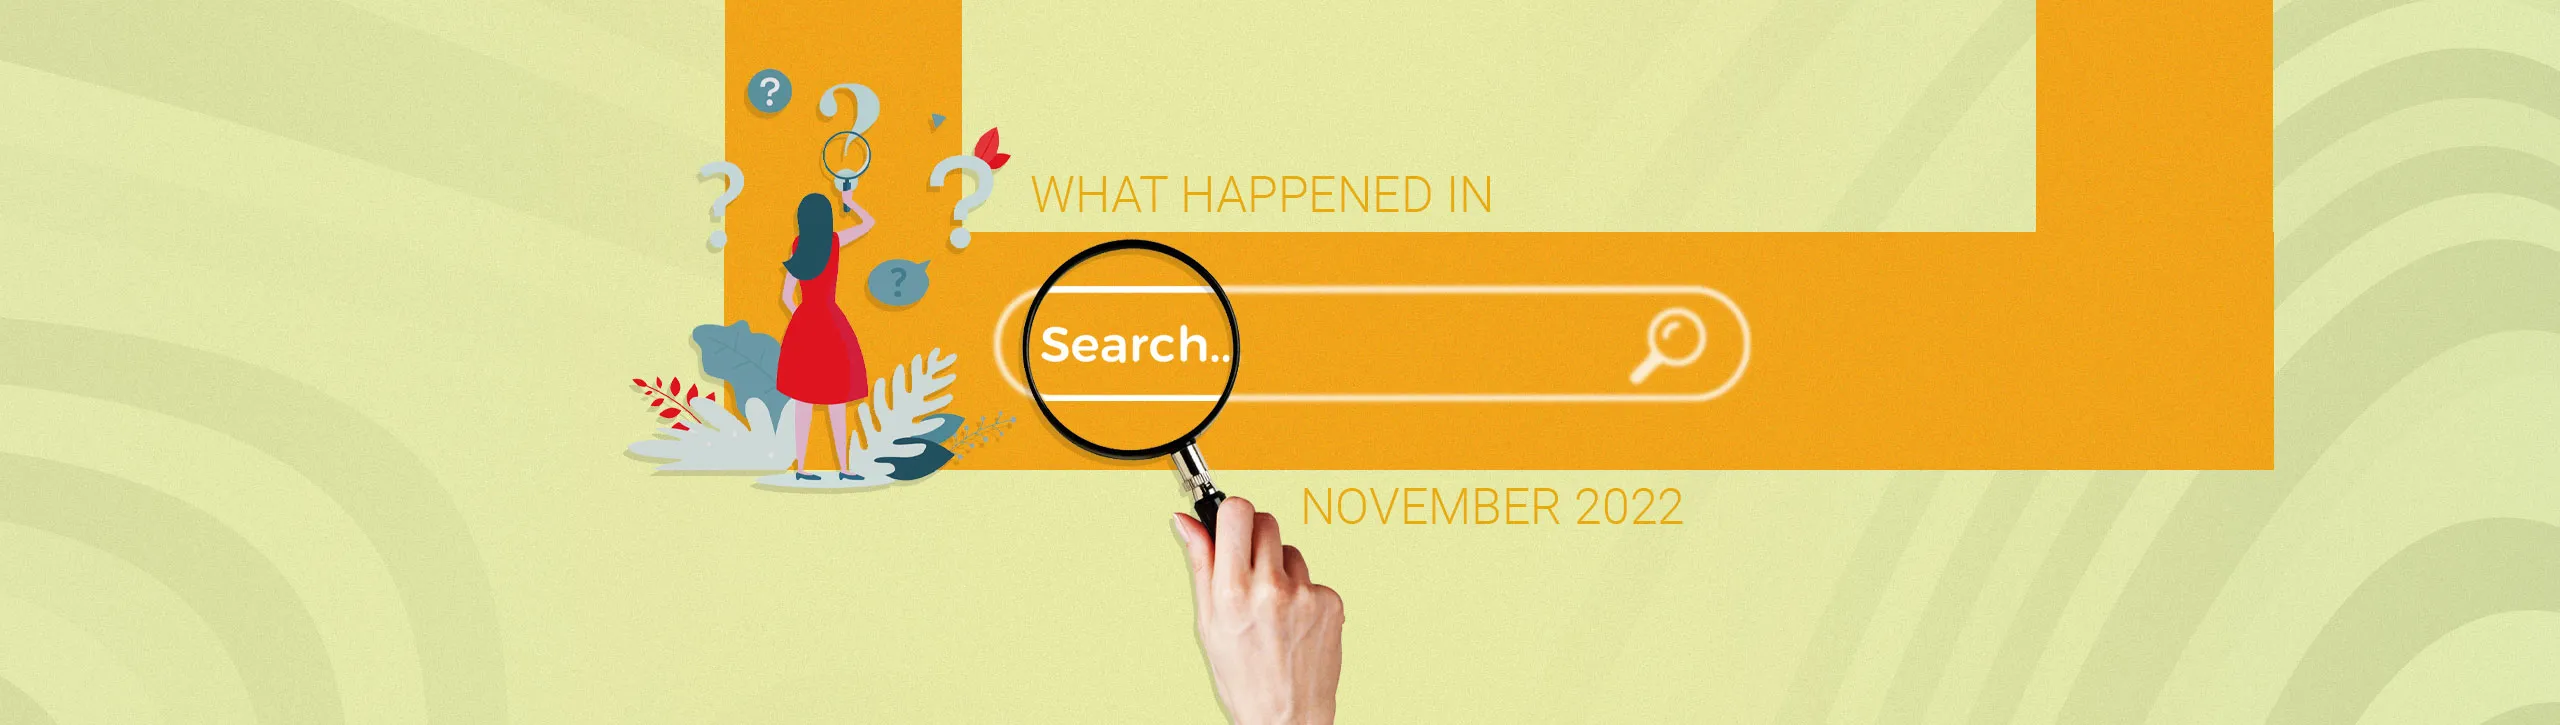 Google Search Updates – November ’22 Changes